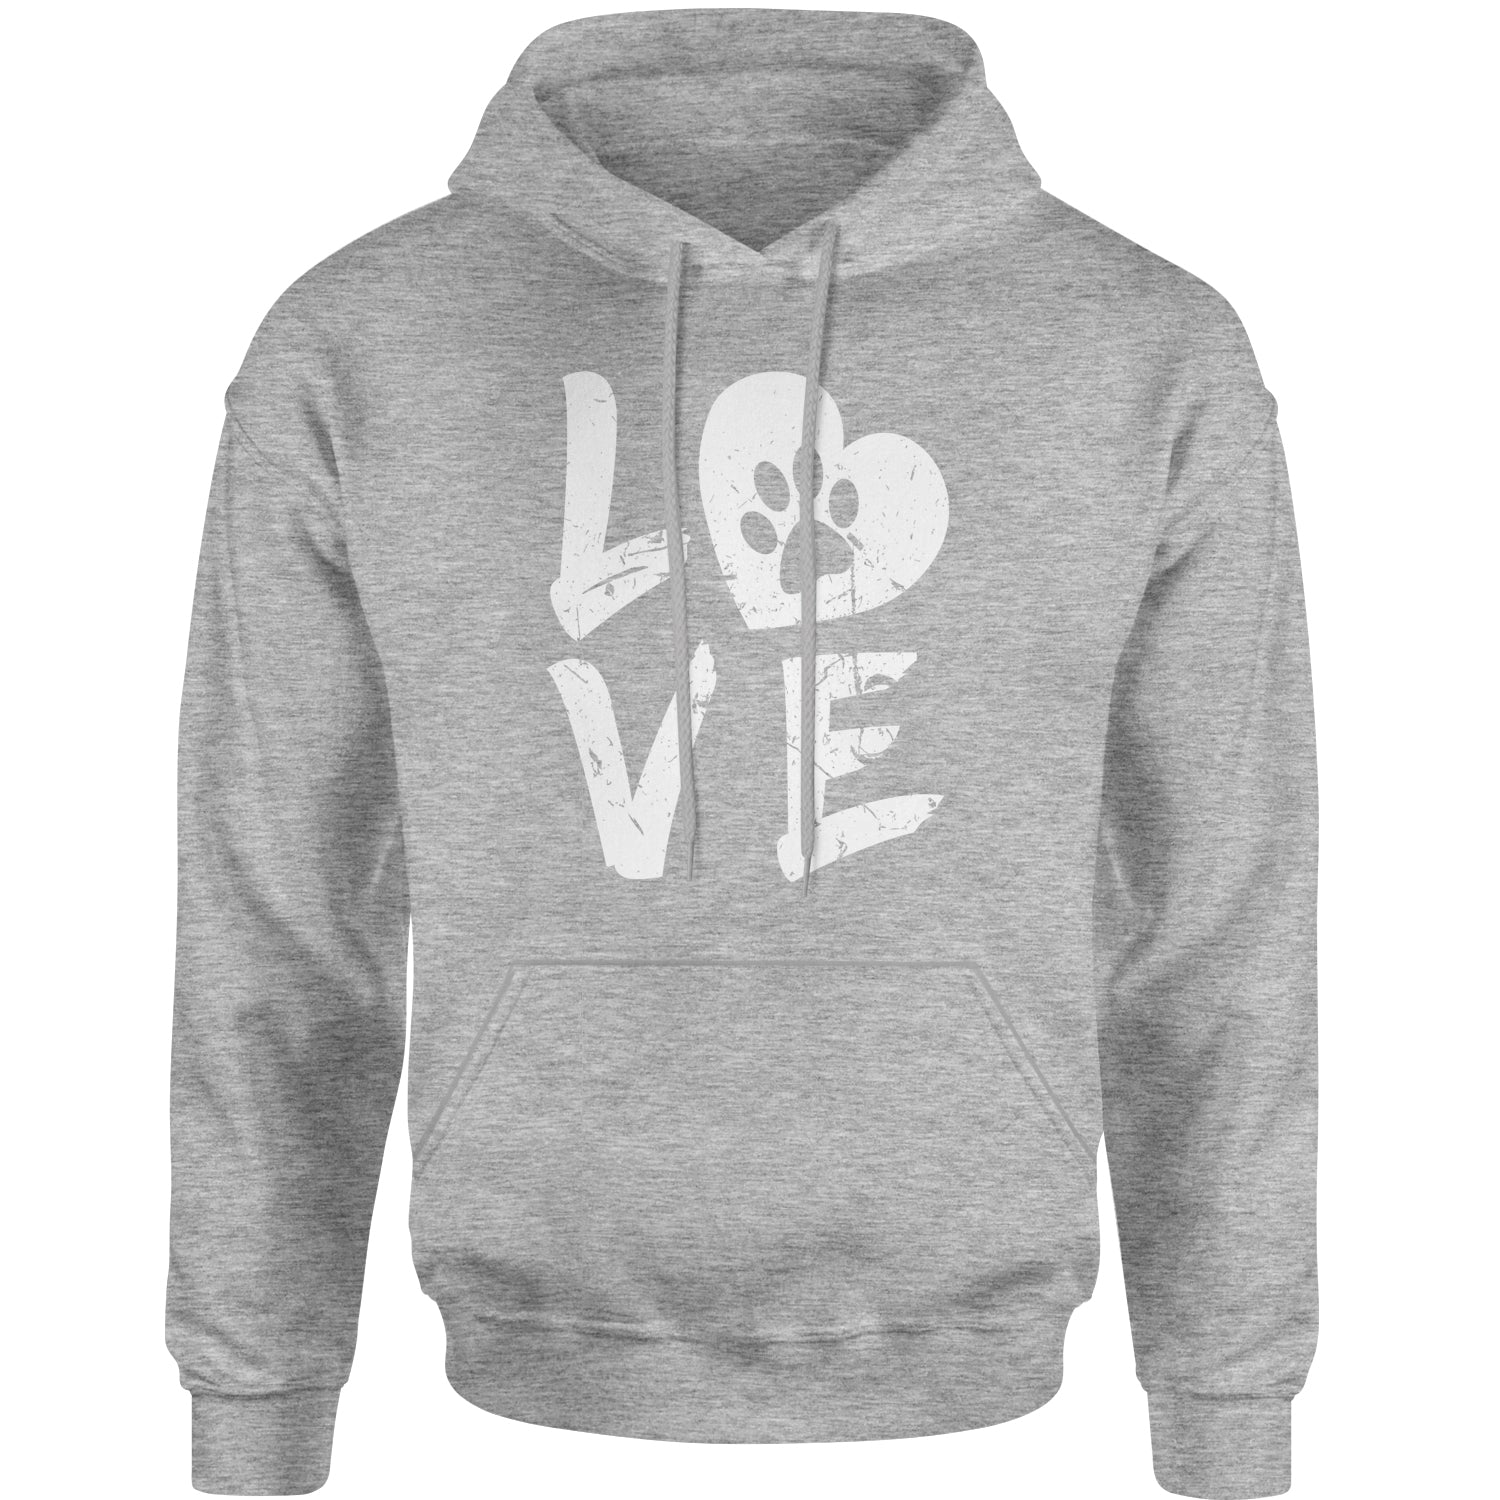 I Love My Dog Paw Print Adult Hoodie Sweatshirt dog, doggie, heart, love, lover, paw, print, puppy by Expression Tees